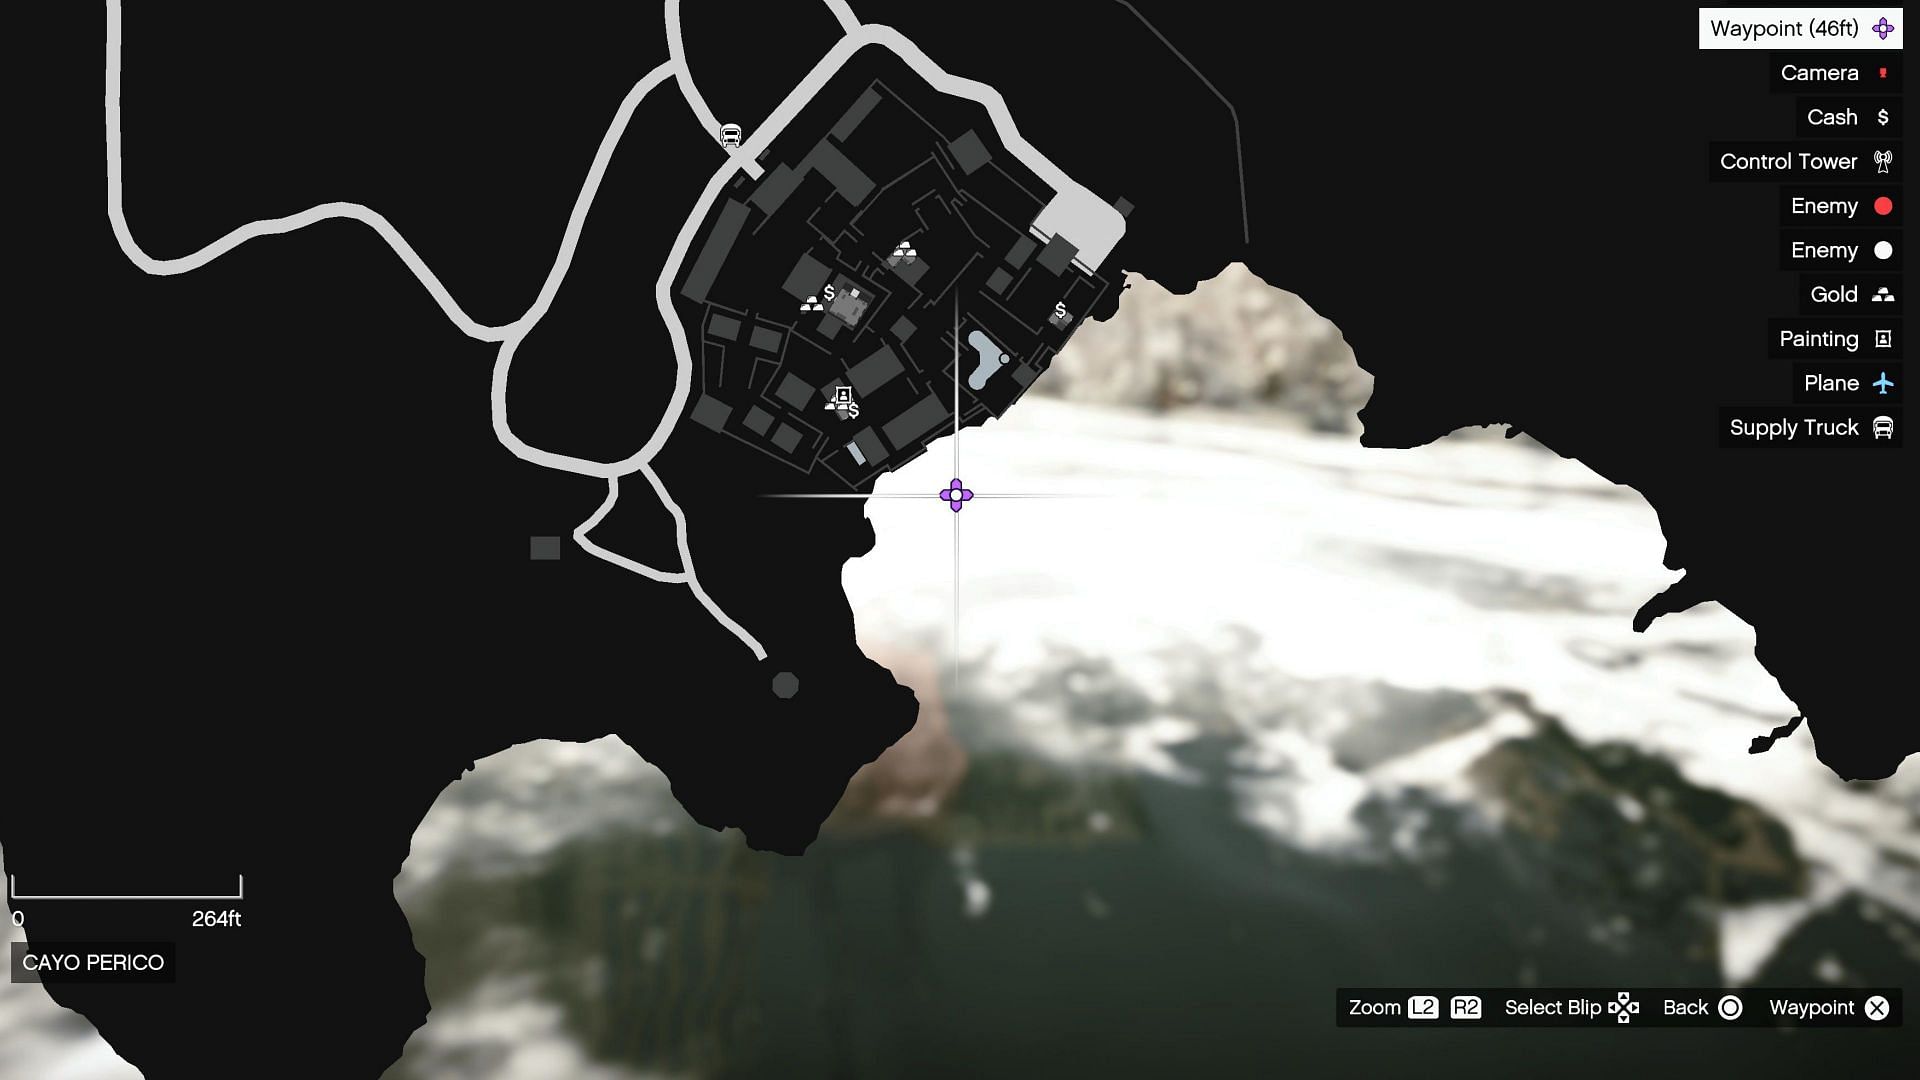 The approximate location of this entry point (Image via Rockstar Games)